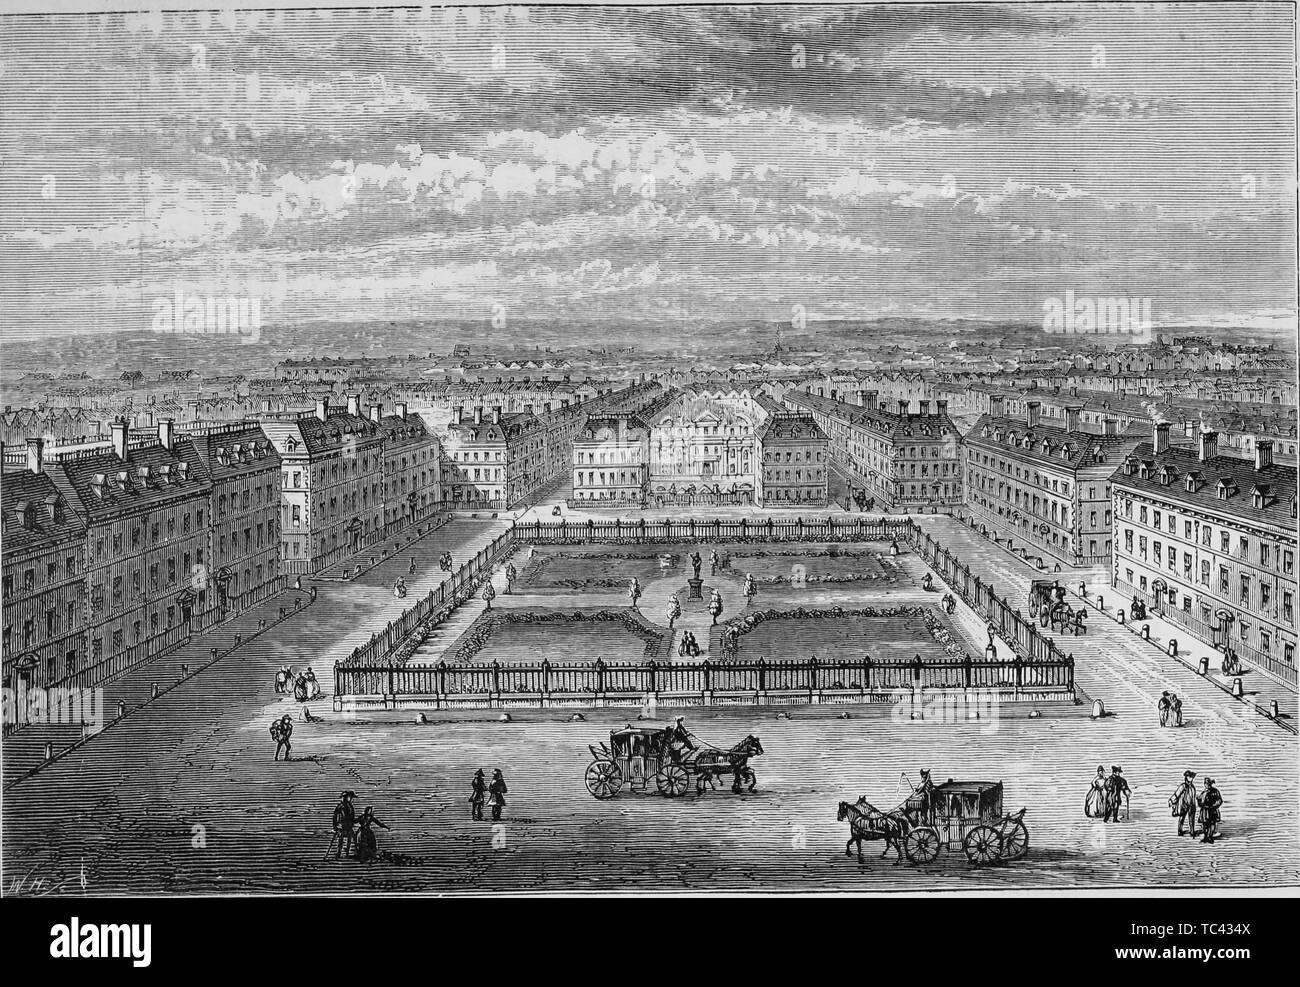 Engraving of the Soho Square in London, England, from the book 'Old and new London: a narrative of its history, its people, and its places' by Thornbury Walter, 1873. Courtesy Internet Archive. () Stock Photo